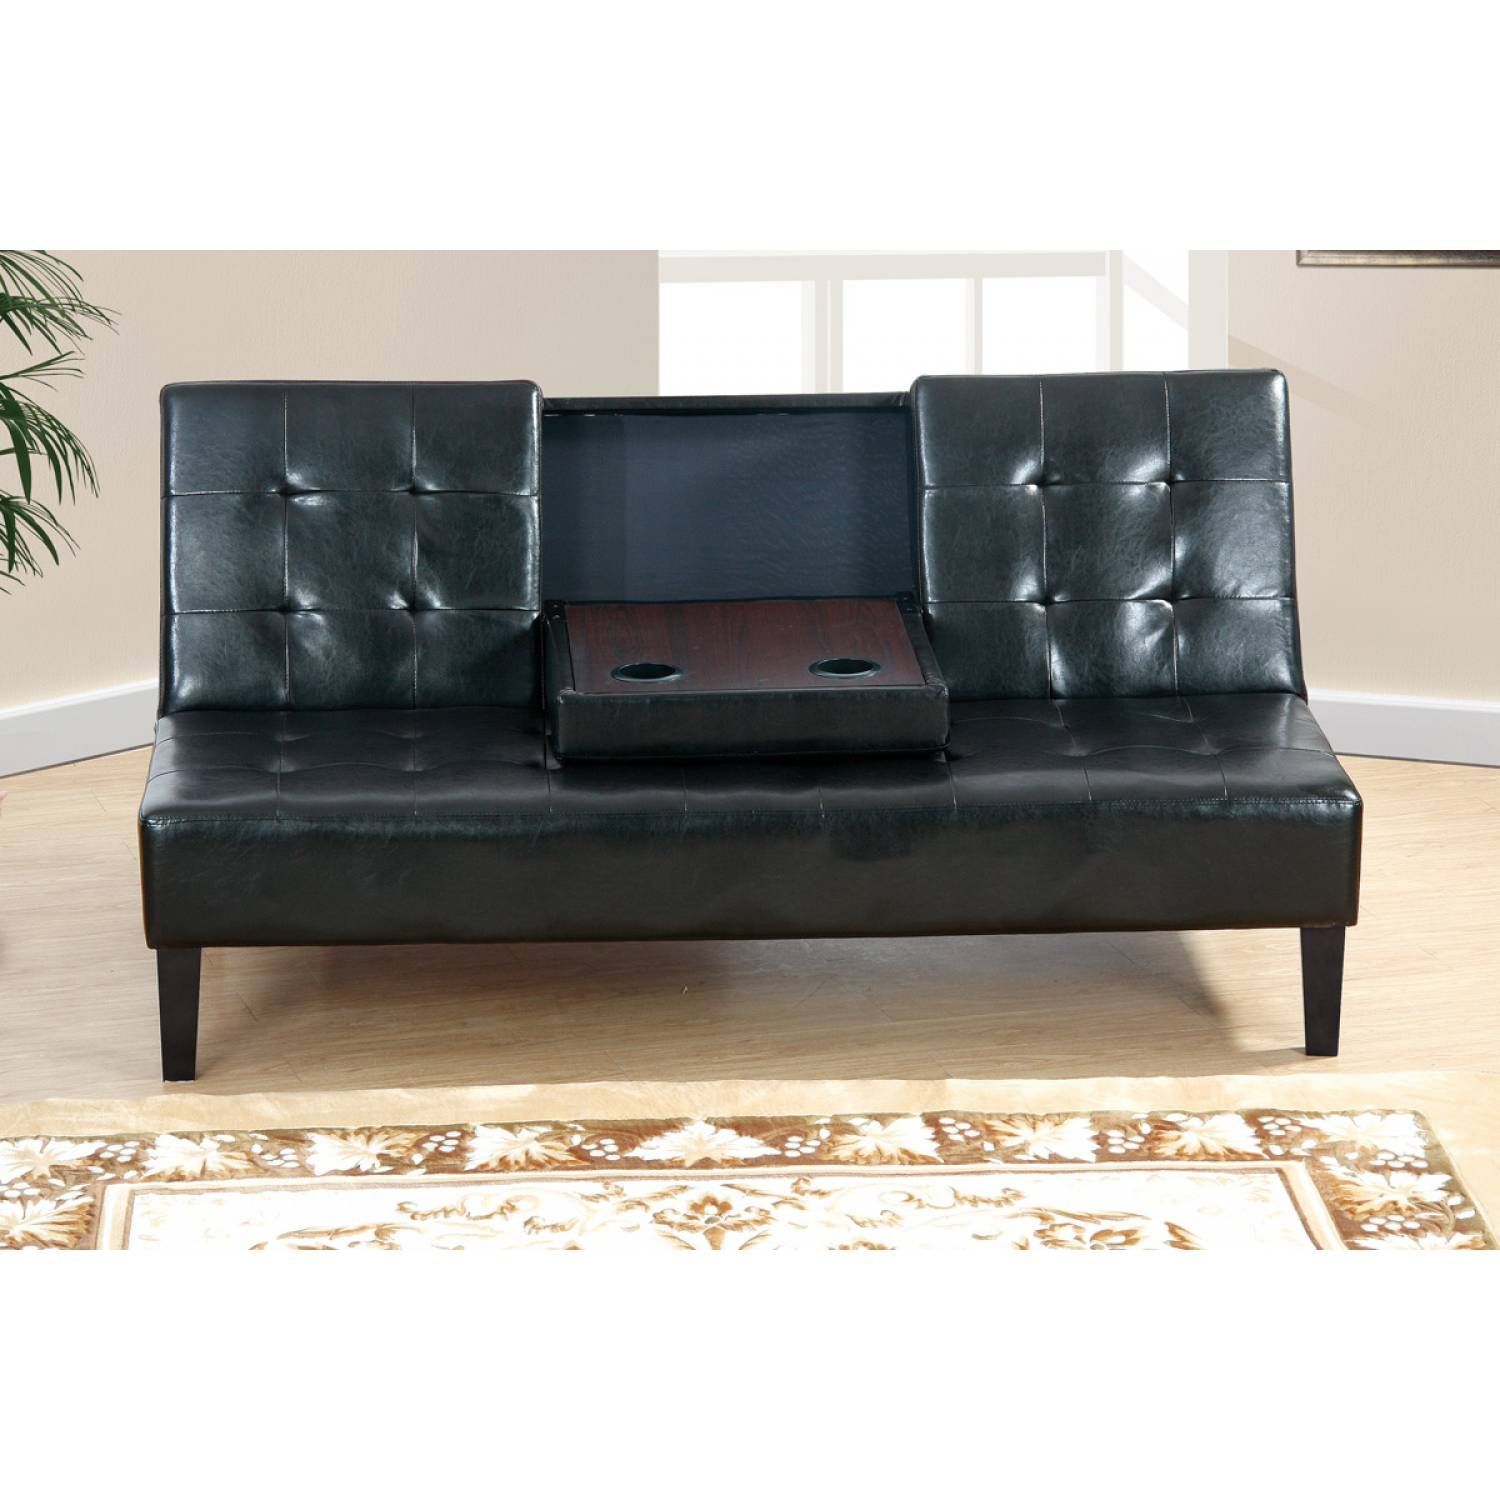 Adjustable Sofa F7209 | Leather Sofa Bed, Black Leather With Regard To Bloutop Upholstered Sectional Sofas (View 11 of 15)